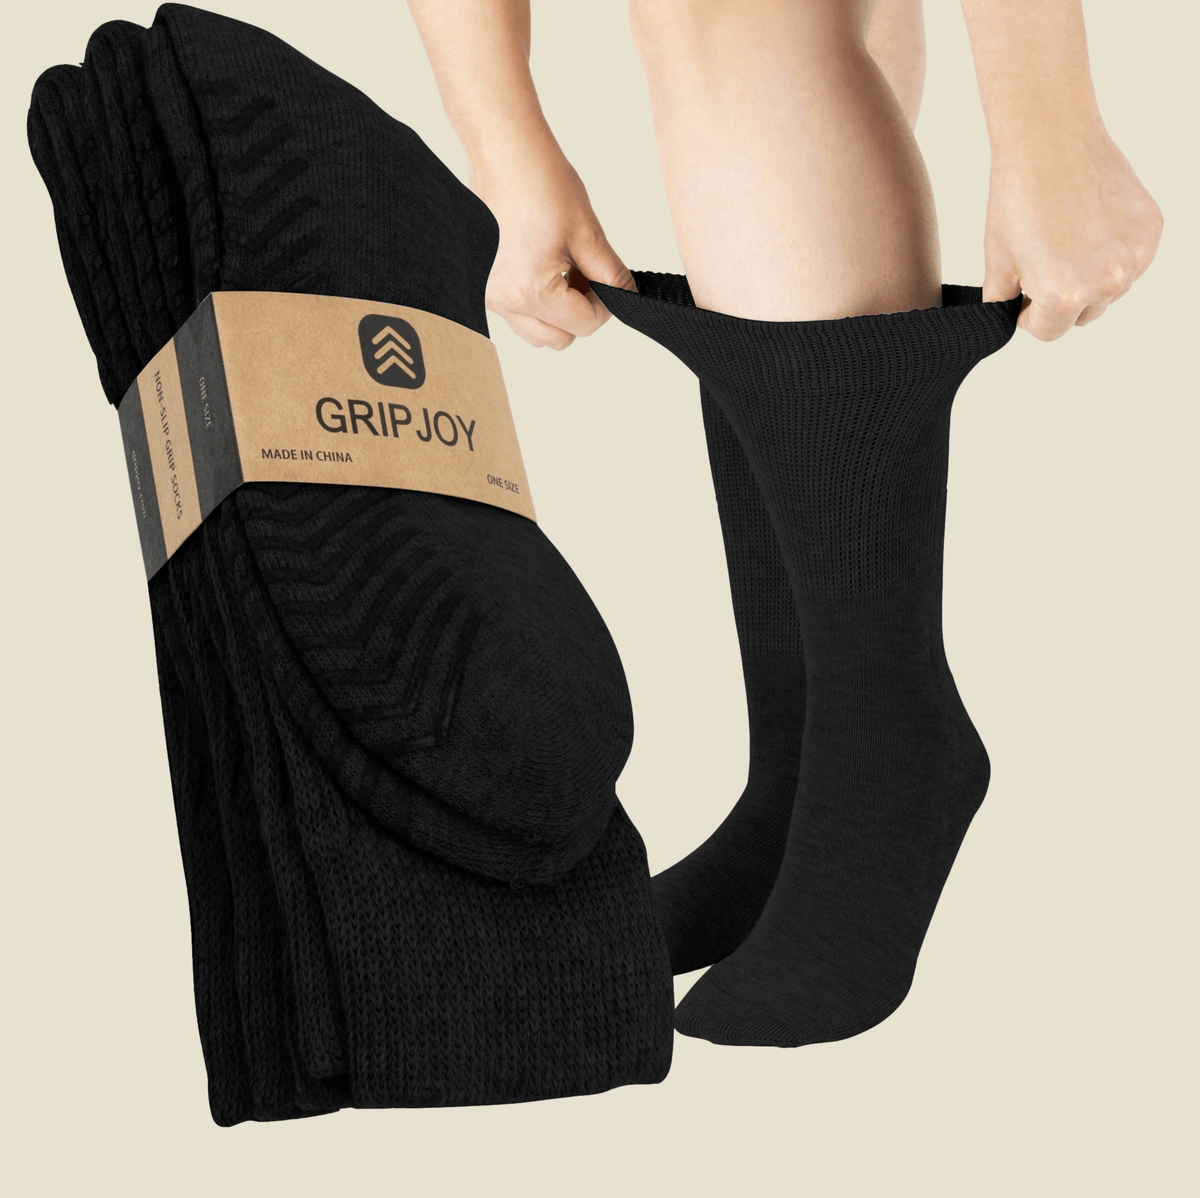 Gripjoy Non-Binding Diabetic Socks with Grippers - Loose Fitting & Stretchy  - Unisex - 3 pairs